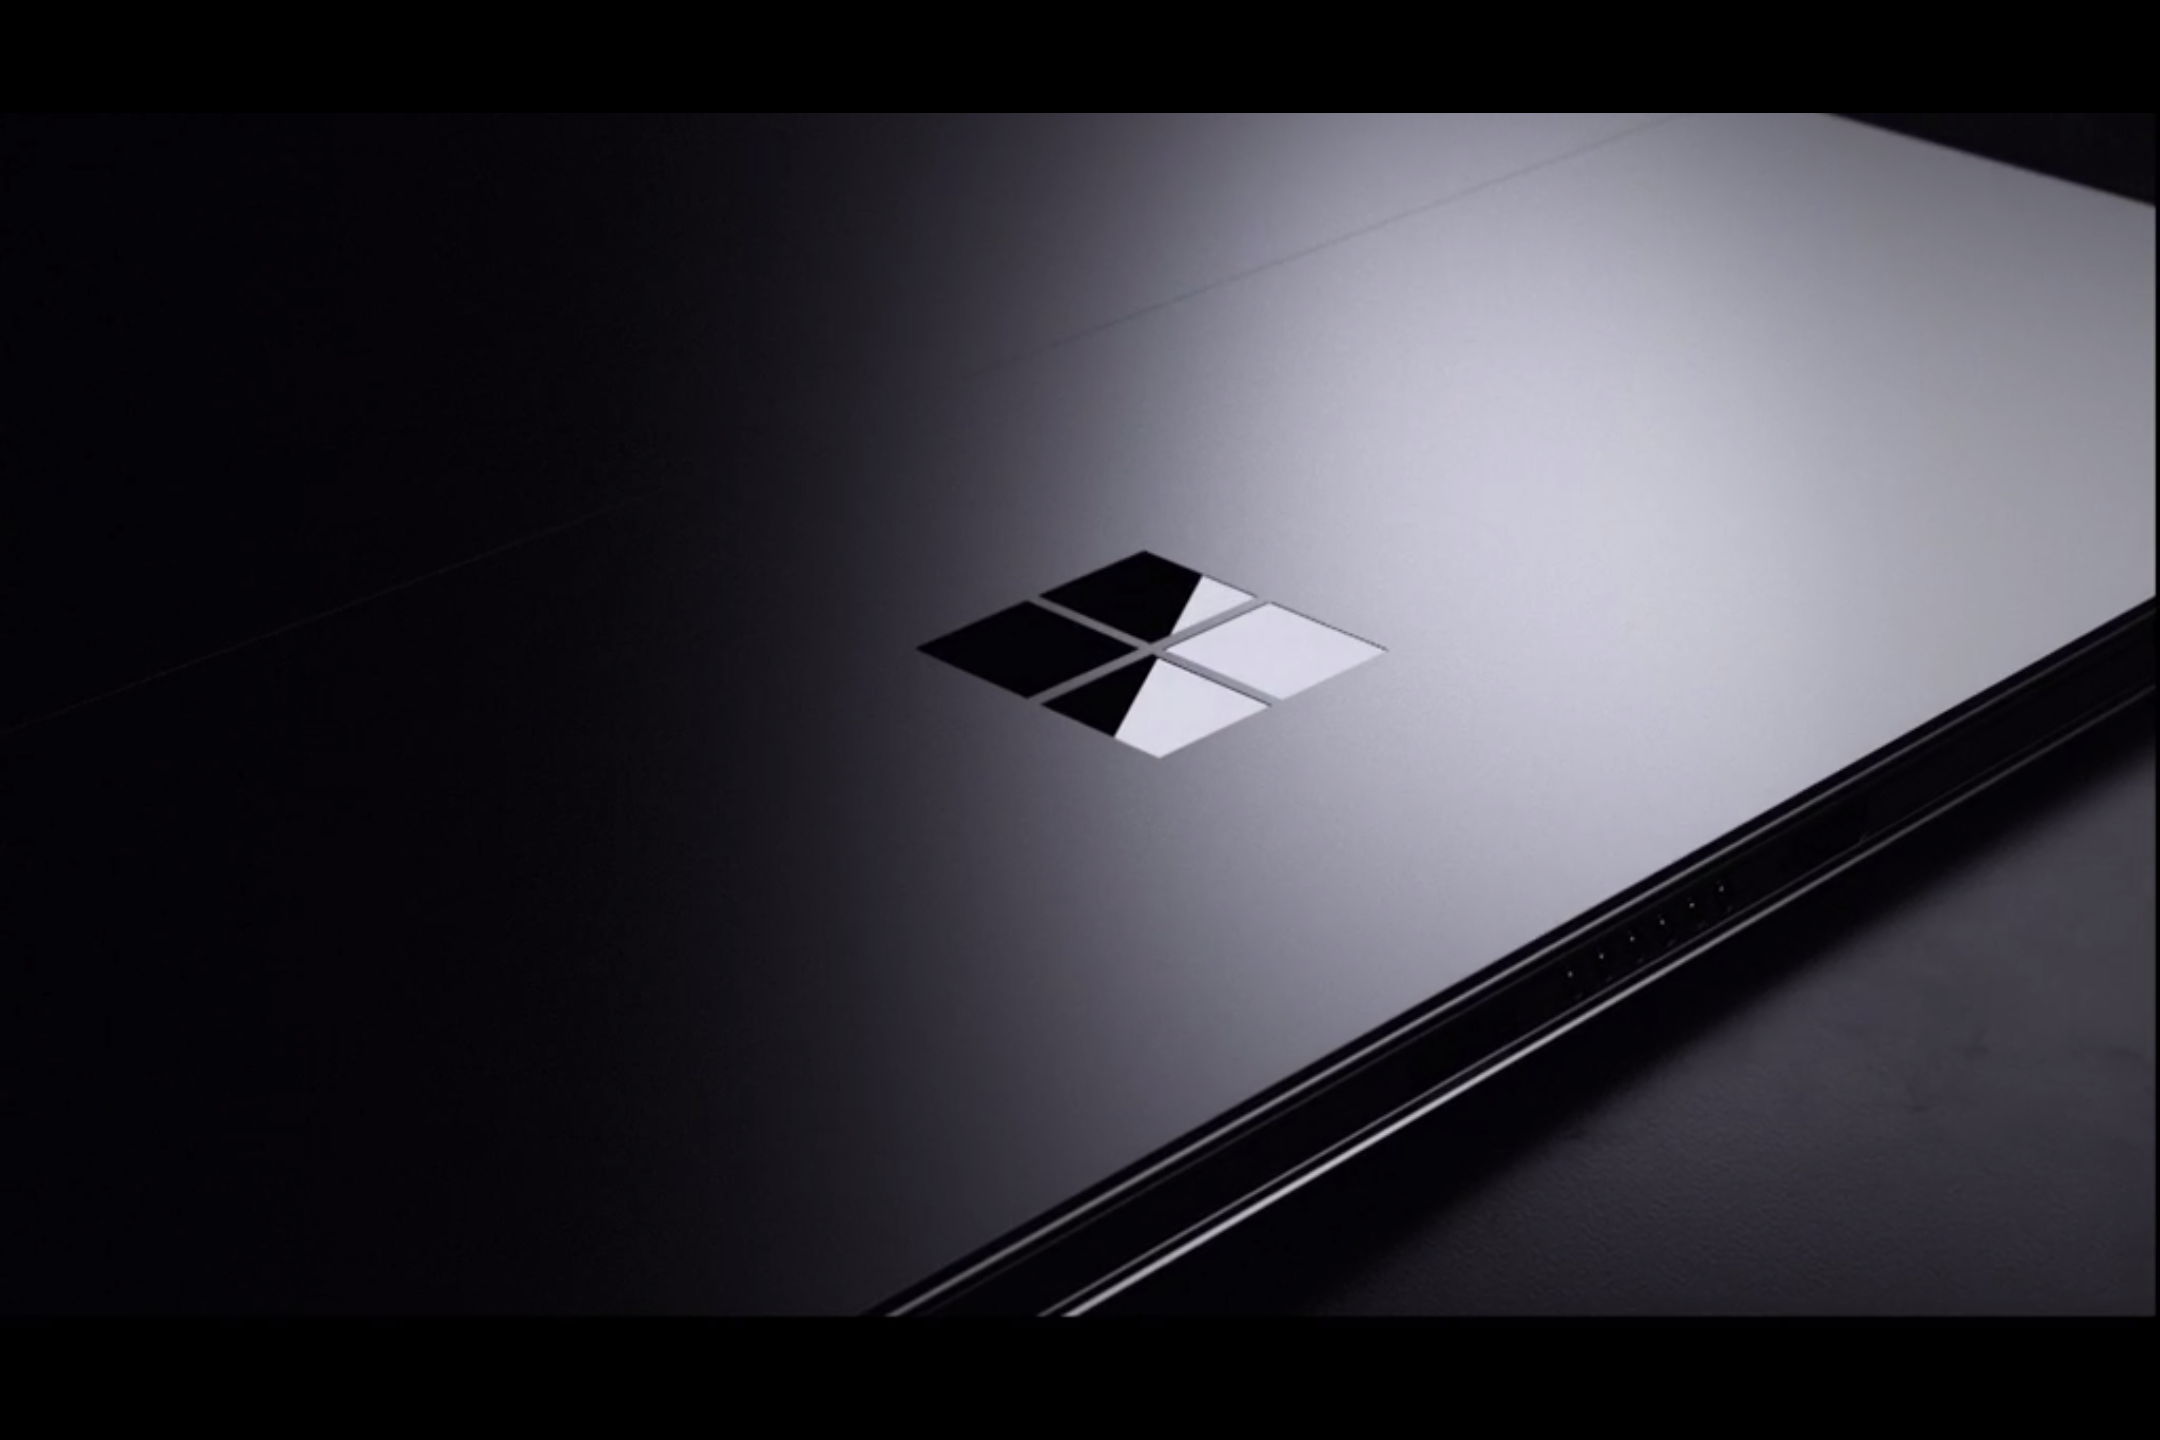 Microsoft's $899 Surface Pro 4 is thin and fast, with Skylake and an